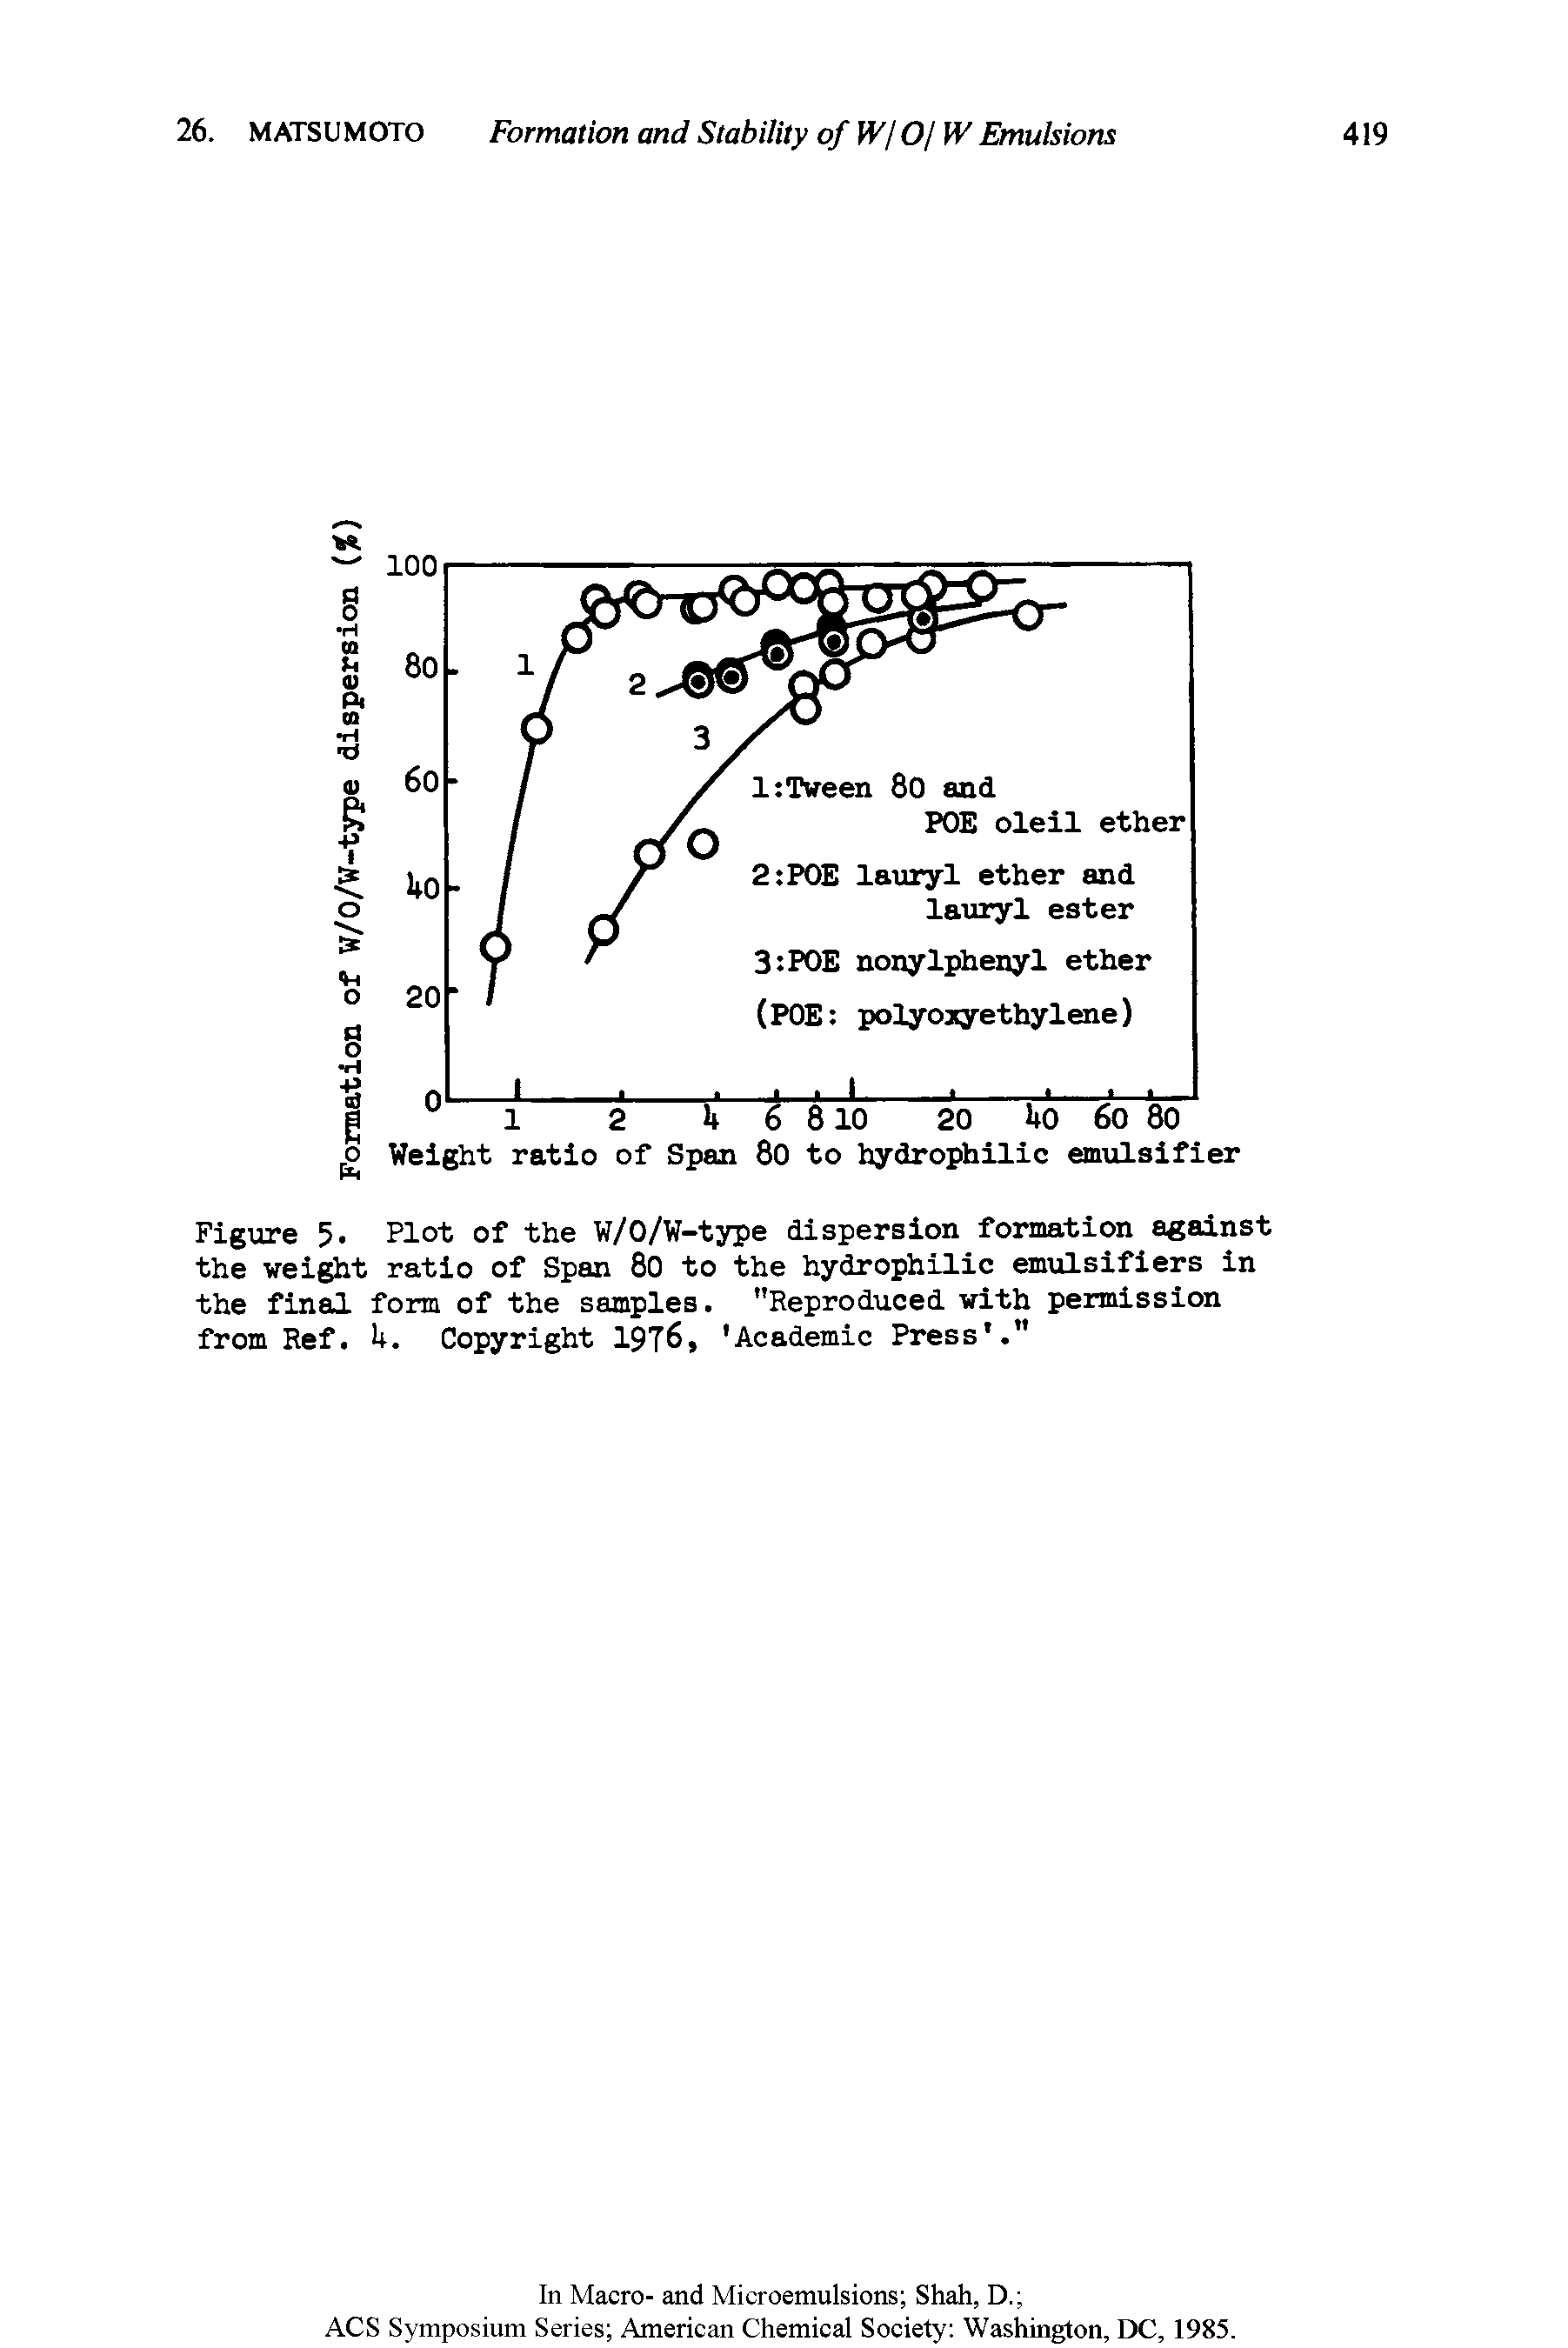 Figure 5. Plot of the W/O/W-type dispersion formation against the weight ratio of Span 80 to the hydrophilic emulsifiers in the final form of the samples. "Reproduced with permission from Ref. U. Copyright 1976, Academic Press. "...